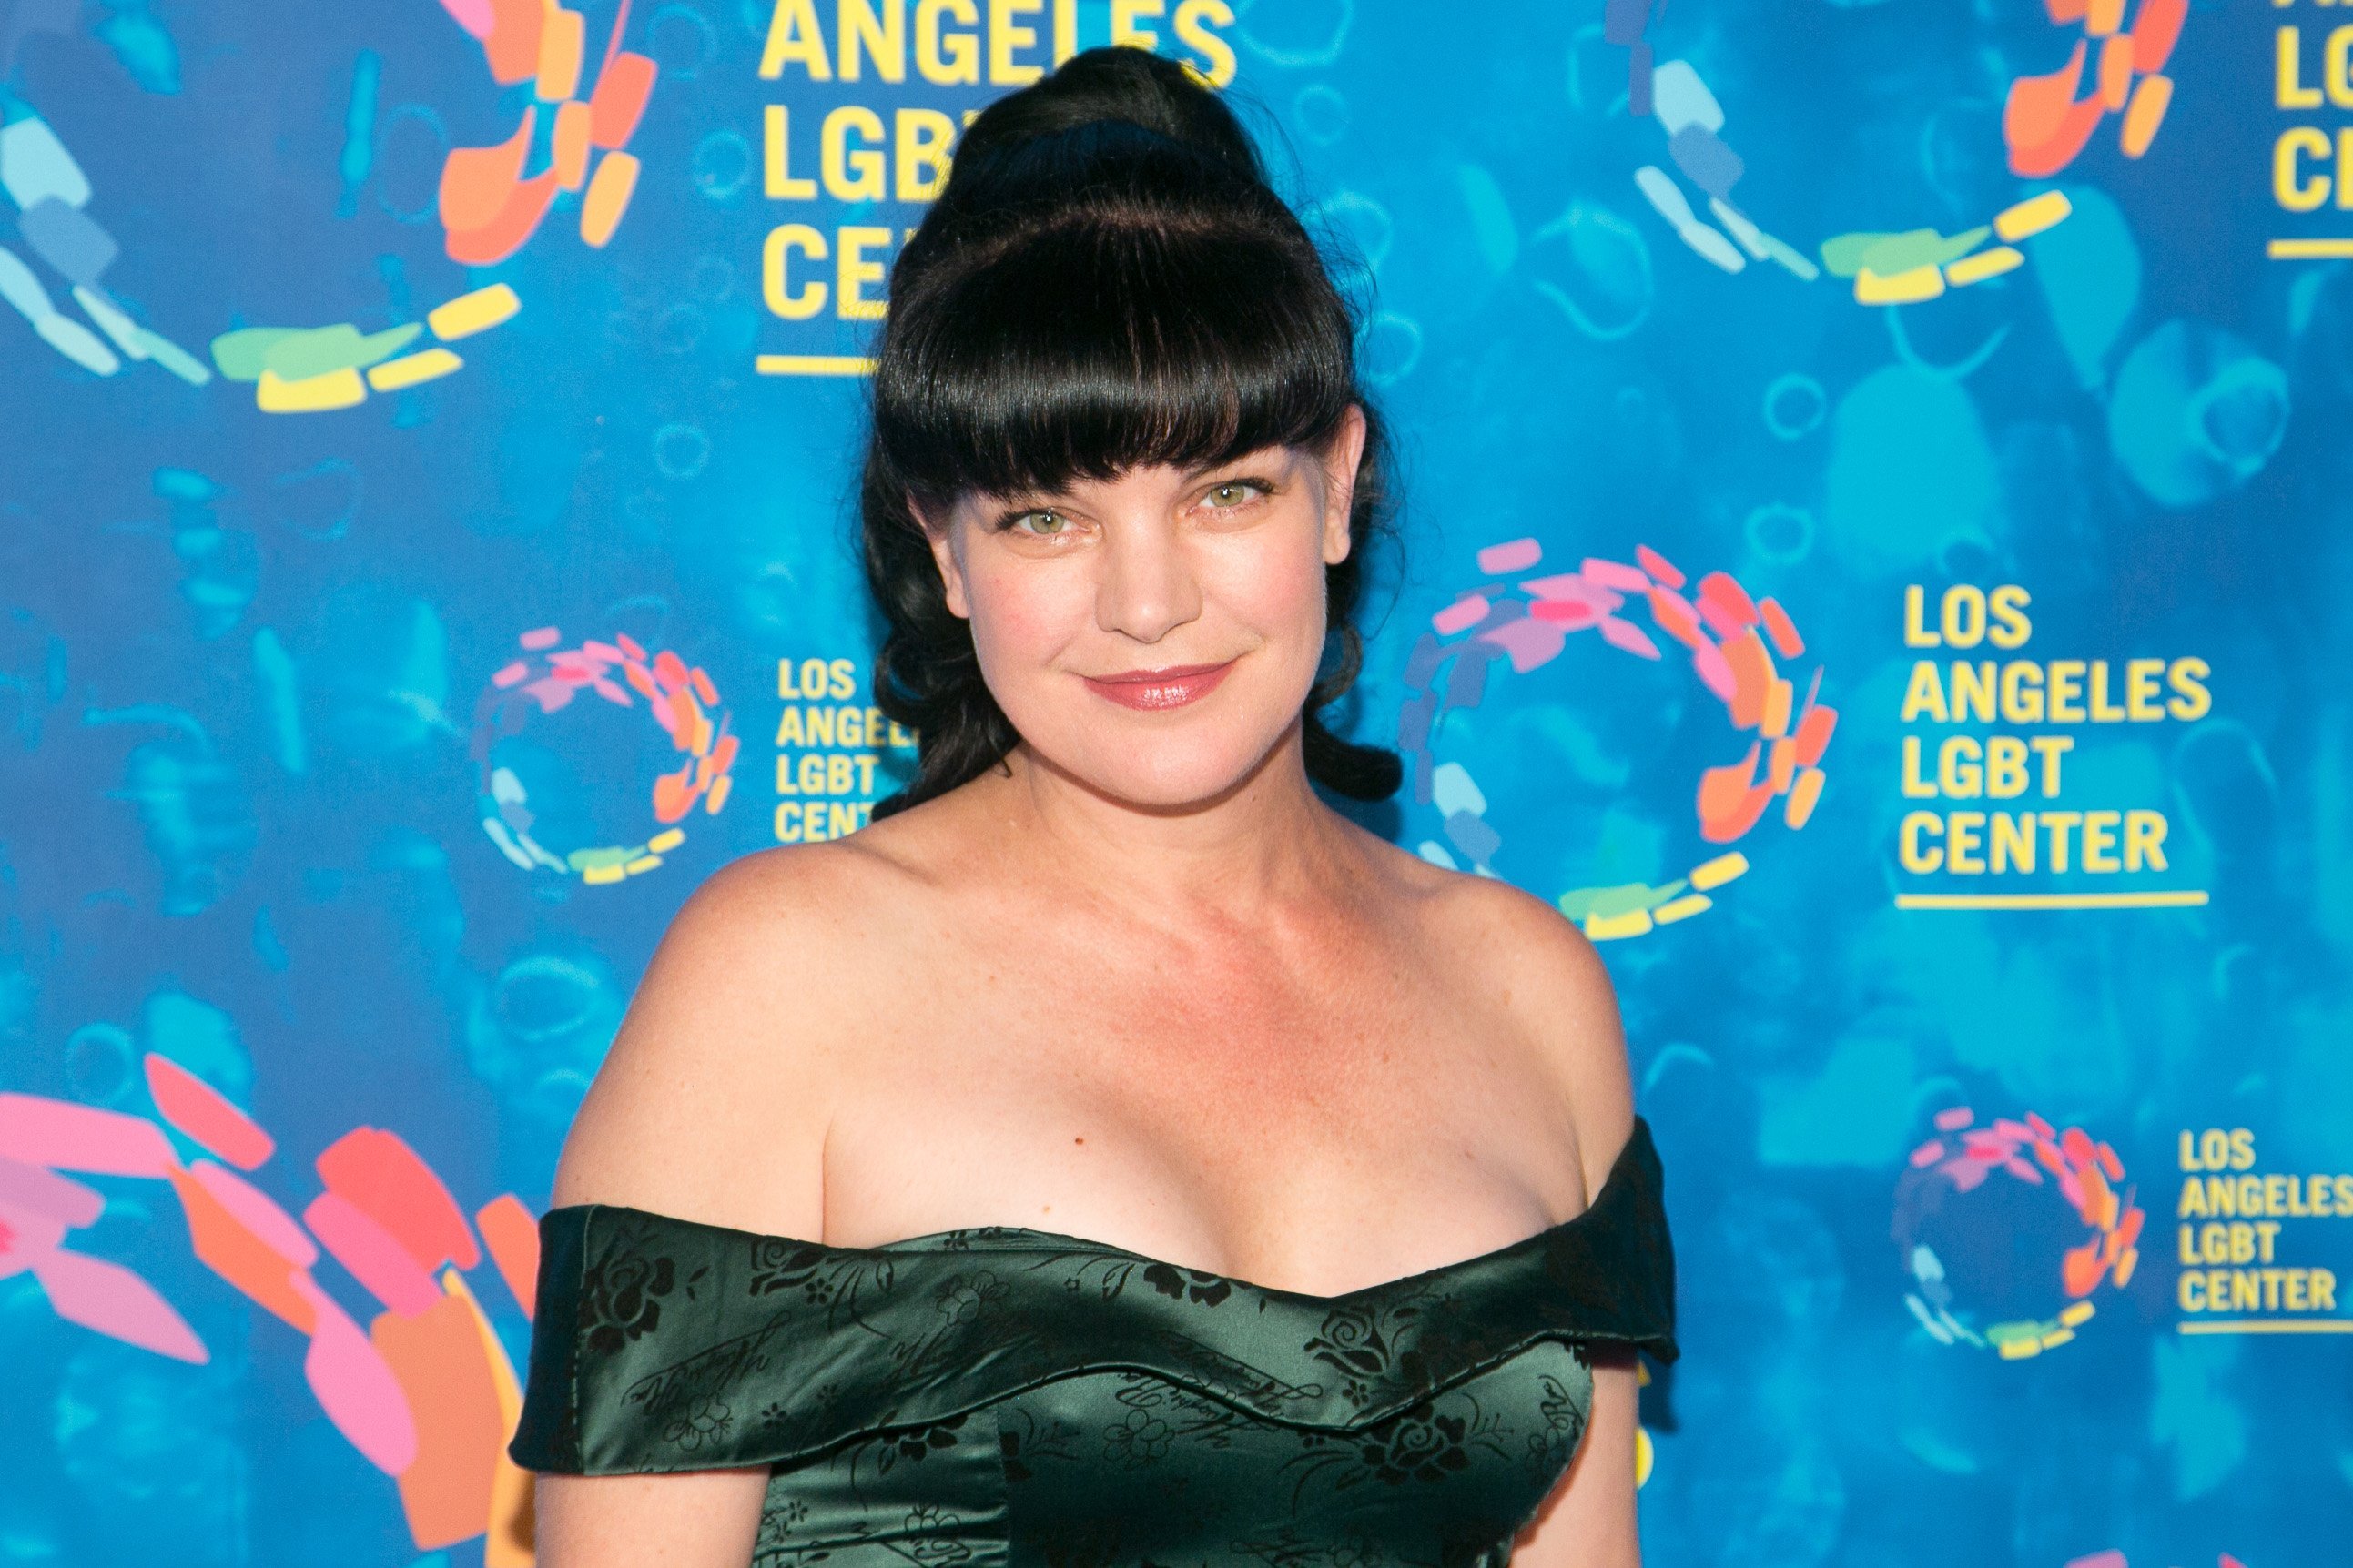 Pauley Perrette attends Los Angeles LGBT Center's 47th Anniversary Gala Vanguard Awards on September 24, 2016 | Photo: GettyImages